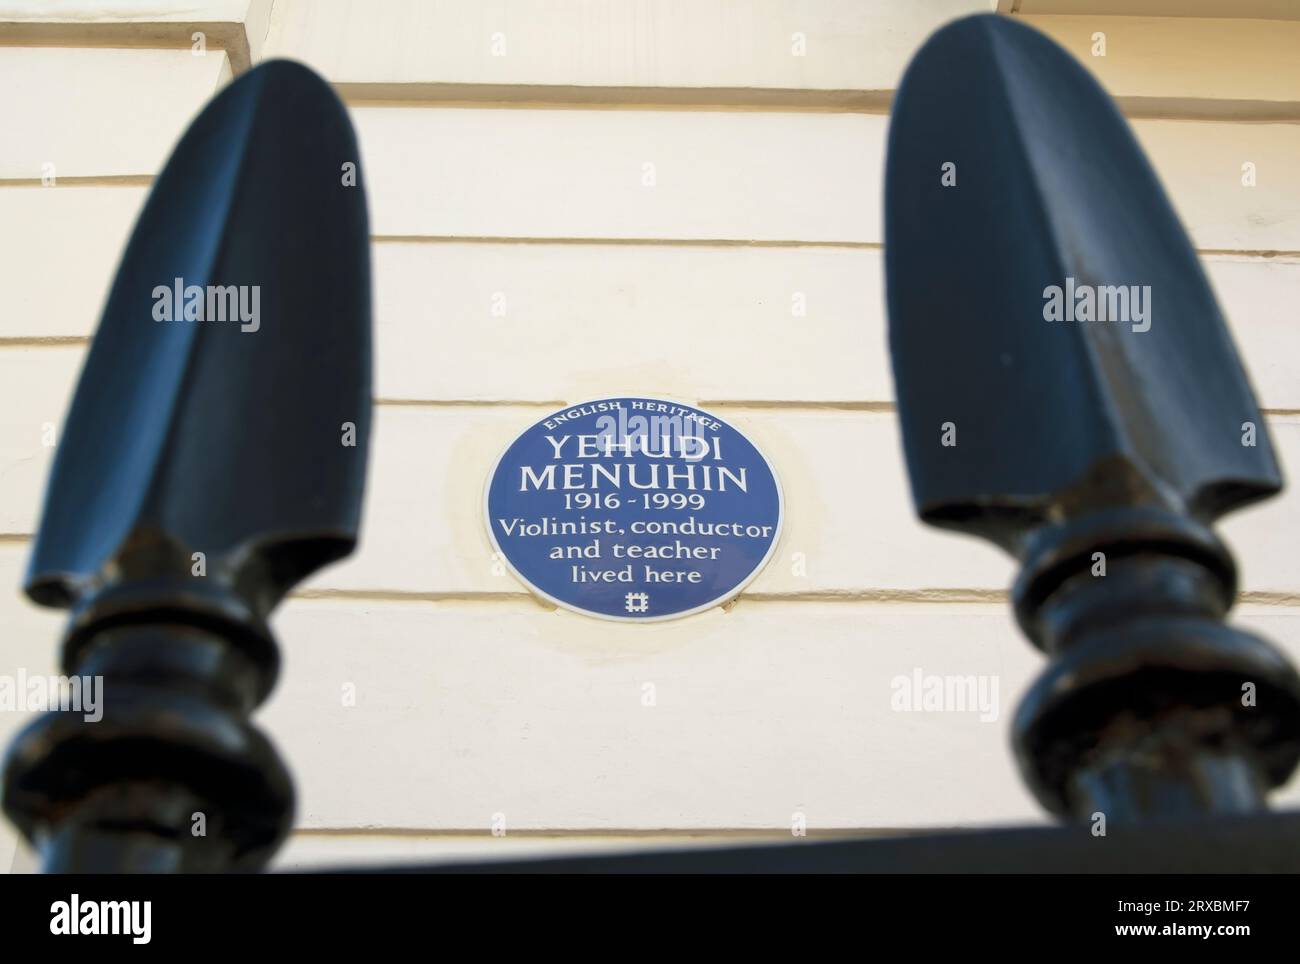 english heritage blue plaque marking a home of violinist, conductor and teacher yehudi menuhin, chester quare, london, england Stock Photo